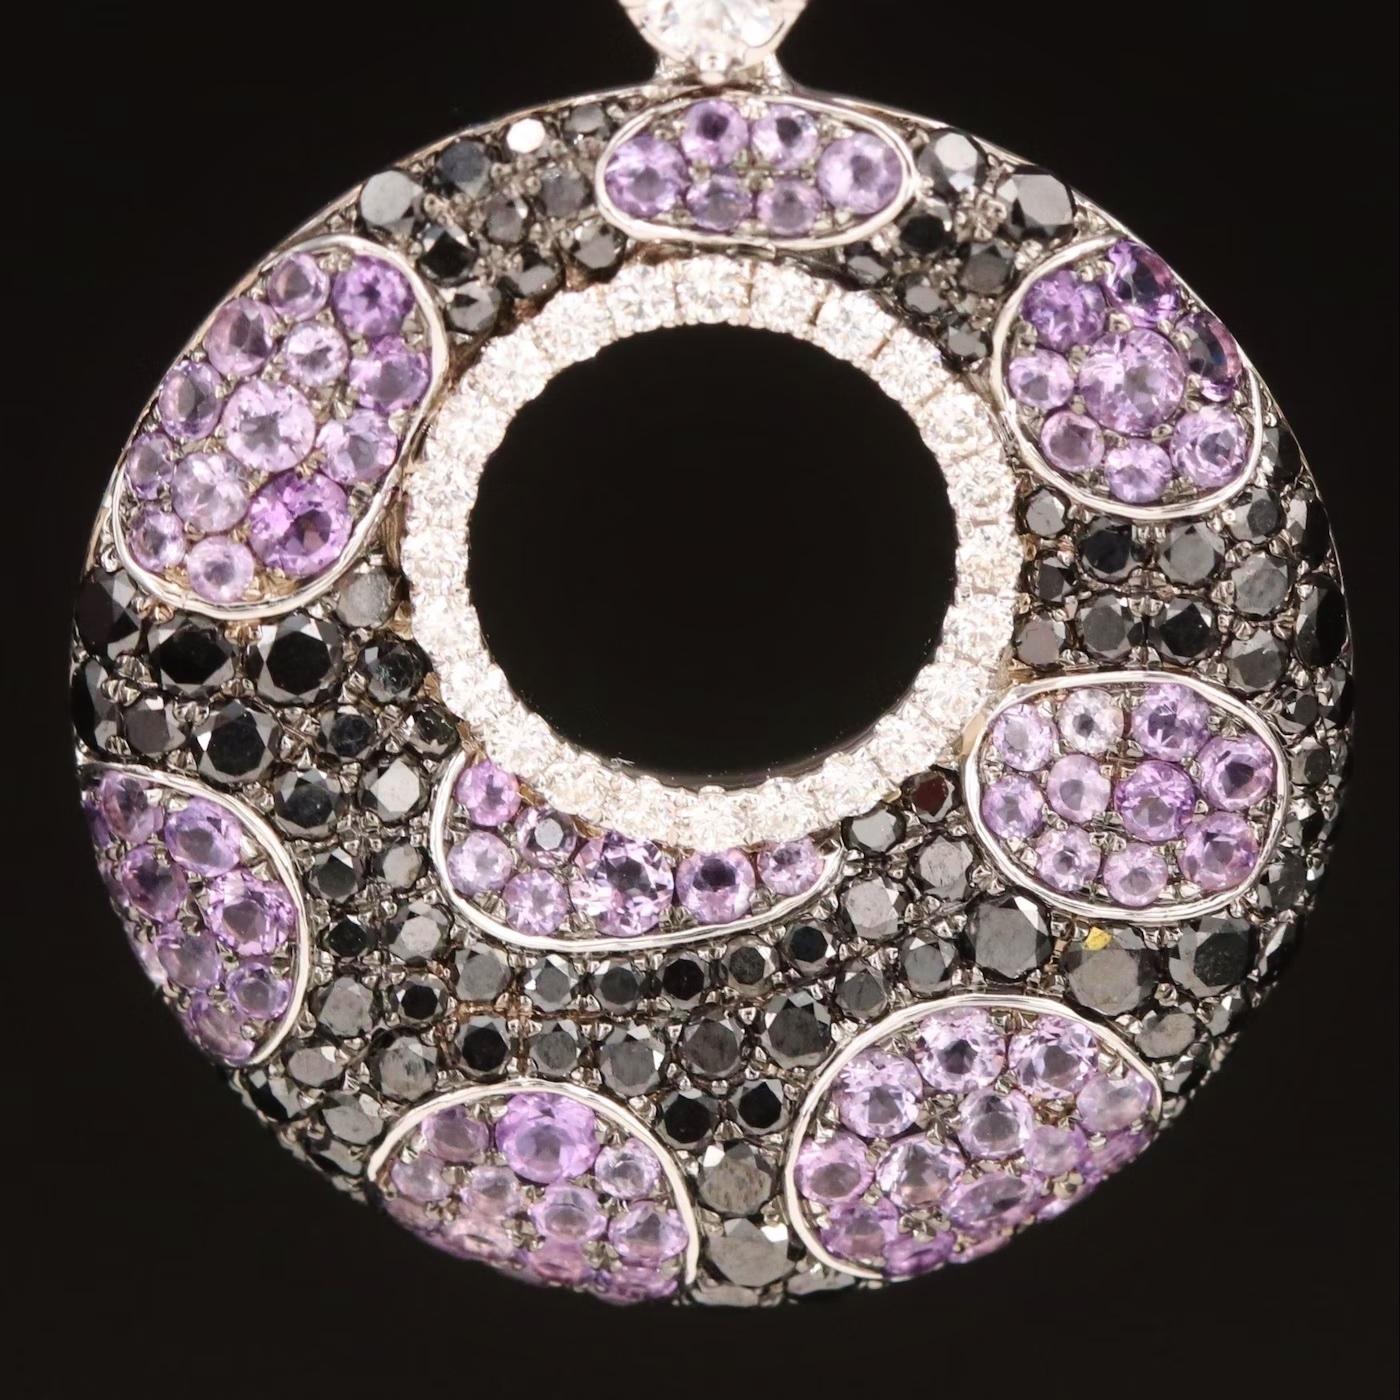 Designer EFFY necklace, fully hallmarked

Limited Edition red carpet item

NEW with tags, Tag price $9500

18K White gold, stamped 18K 

6.75 CT Diamond and Amethyst, Animal Print arrangement 
          - 3.25 CT Black Diamond
          - 0.5 CT